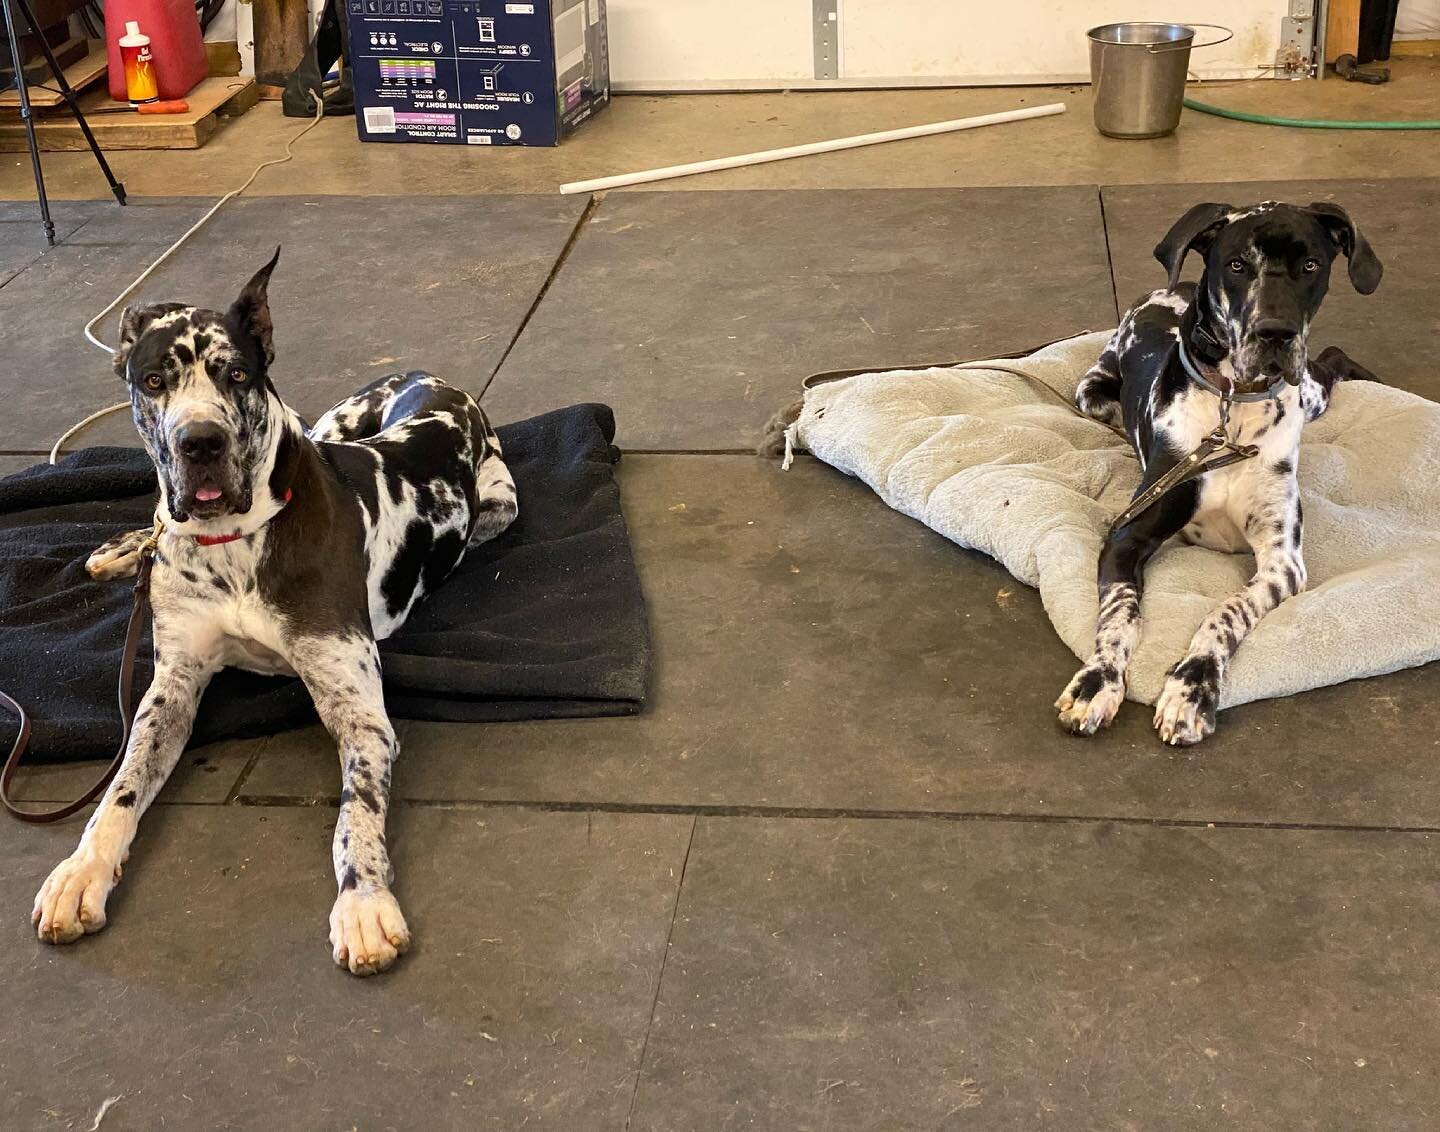 Two fur Tuesday!!!! Kane and Tag are back for boarding this holiday week. Here at SCC we always brush up our prior training clients to keep their dogs sharp and in control&hellip;. Training must remain constant to gain consistency. These two did grea